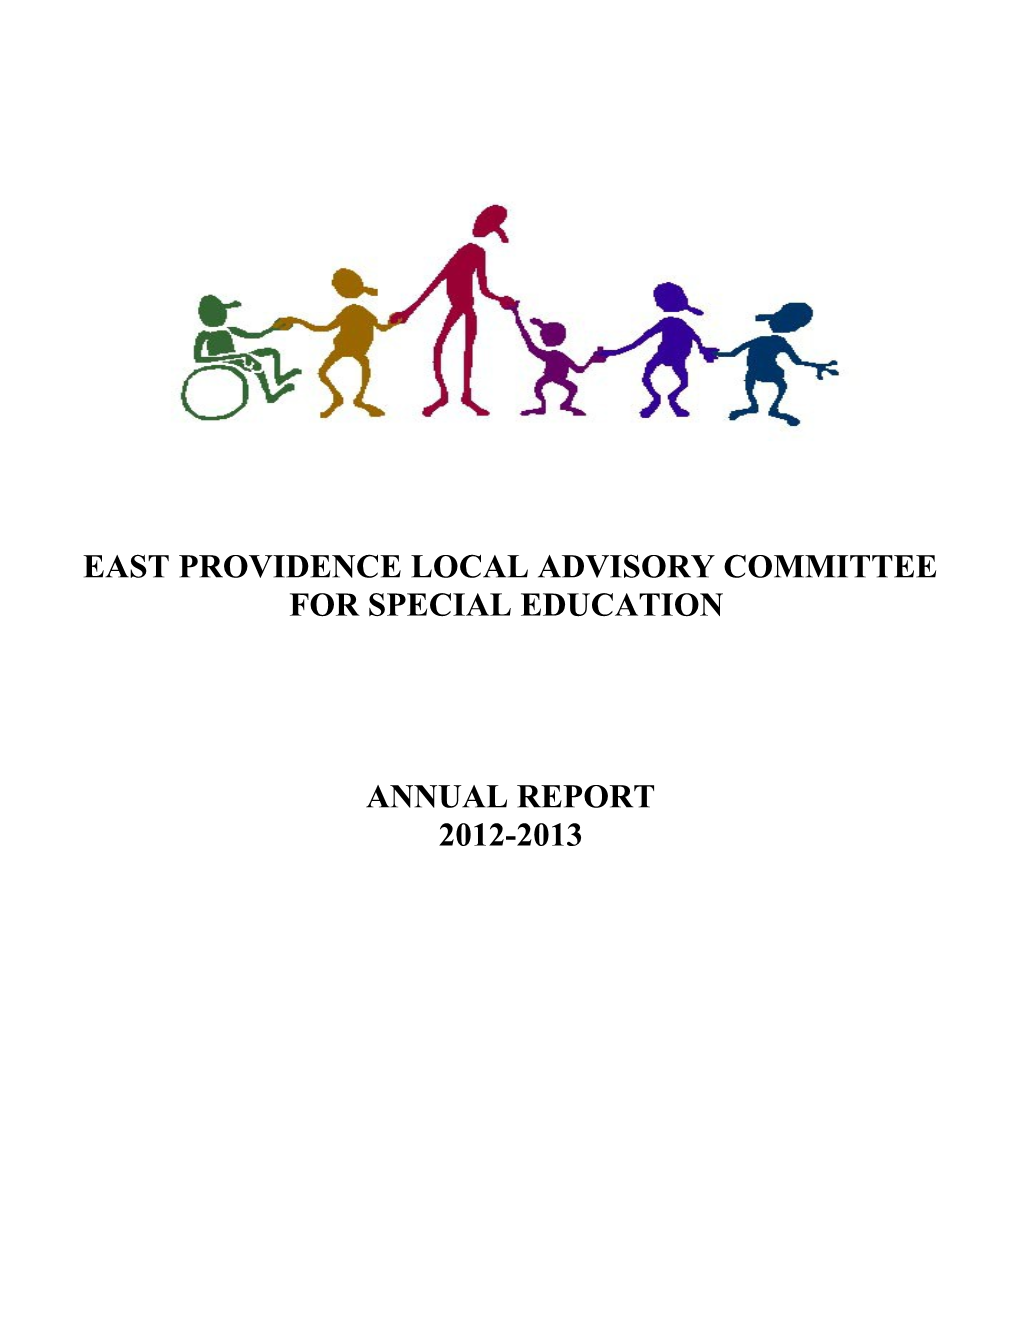 East Providence Local Advisory Committee for Special Education